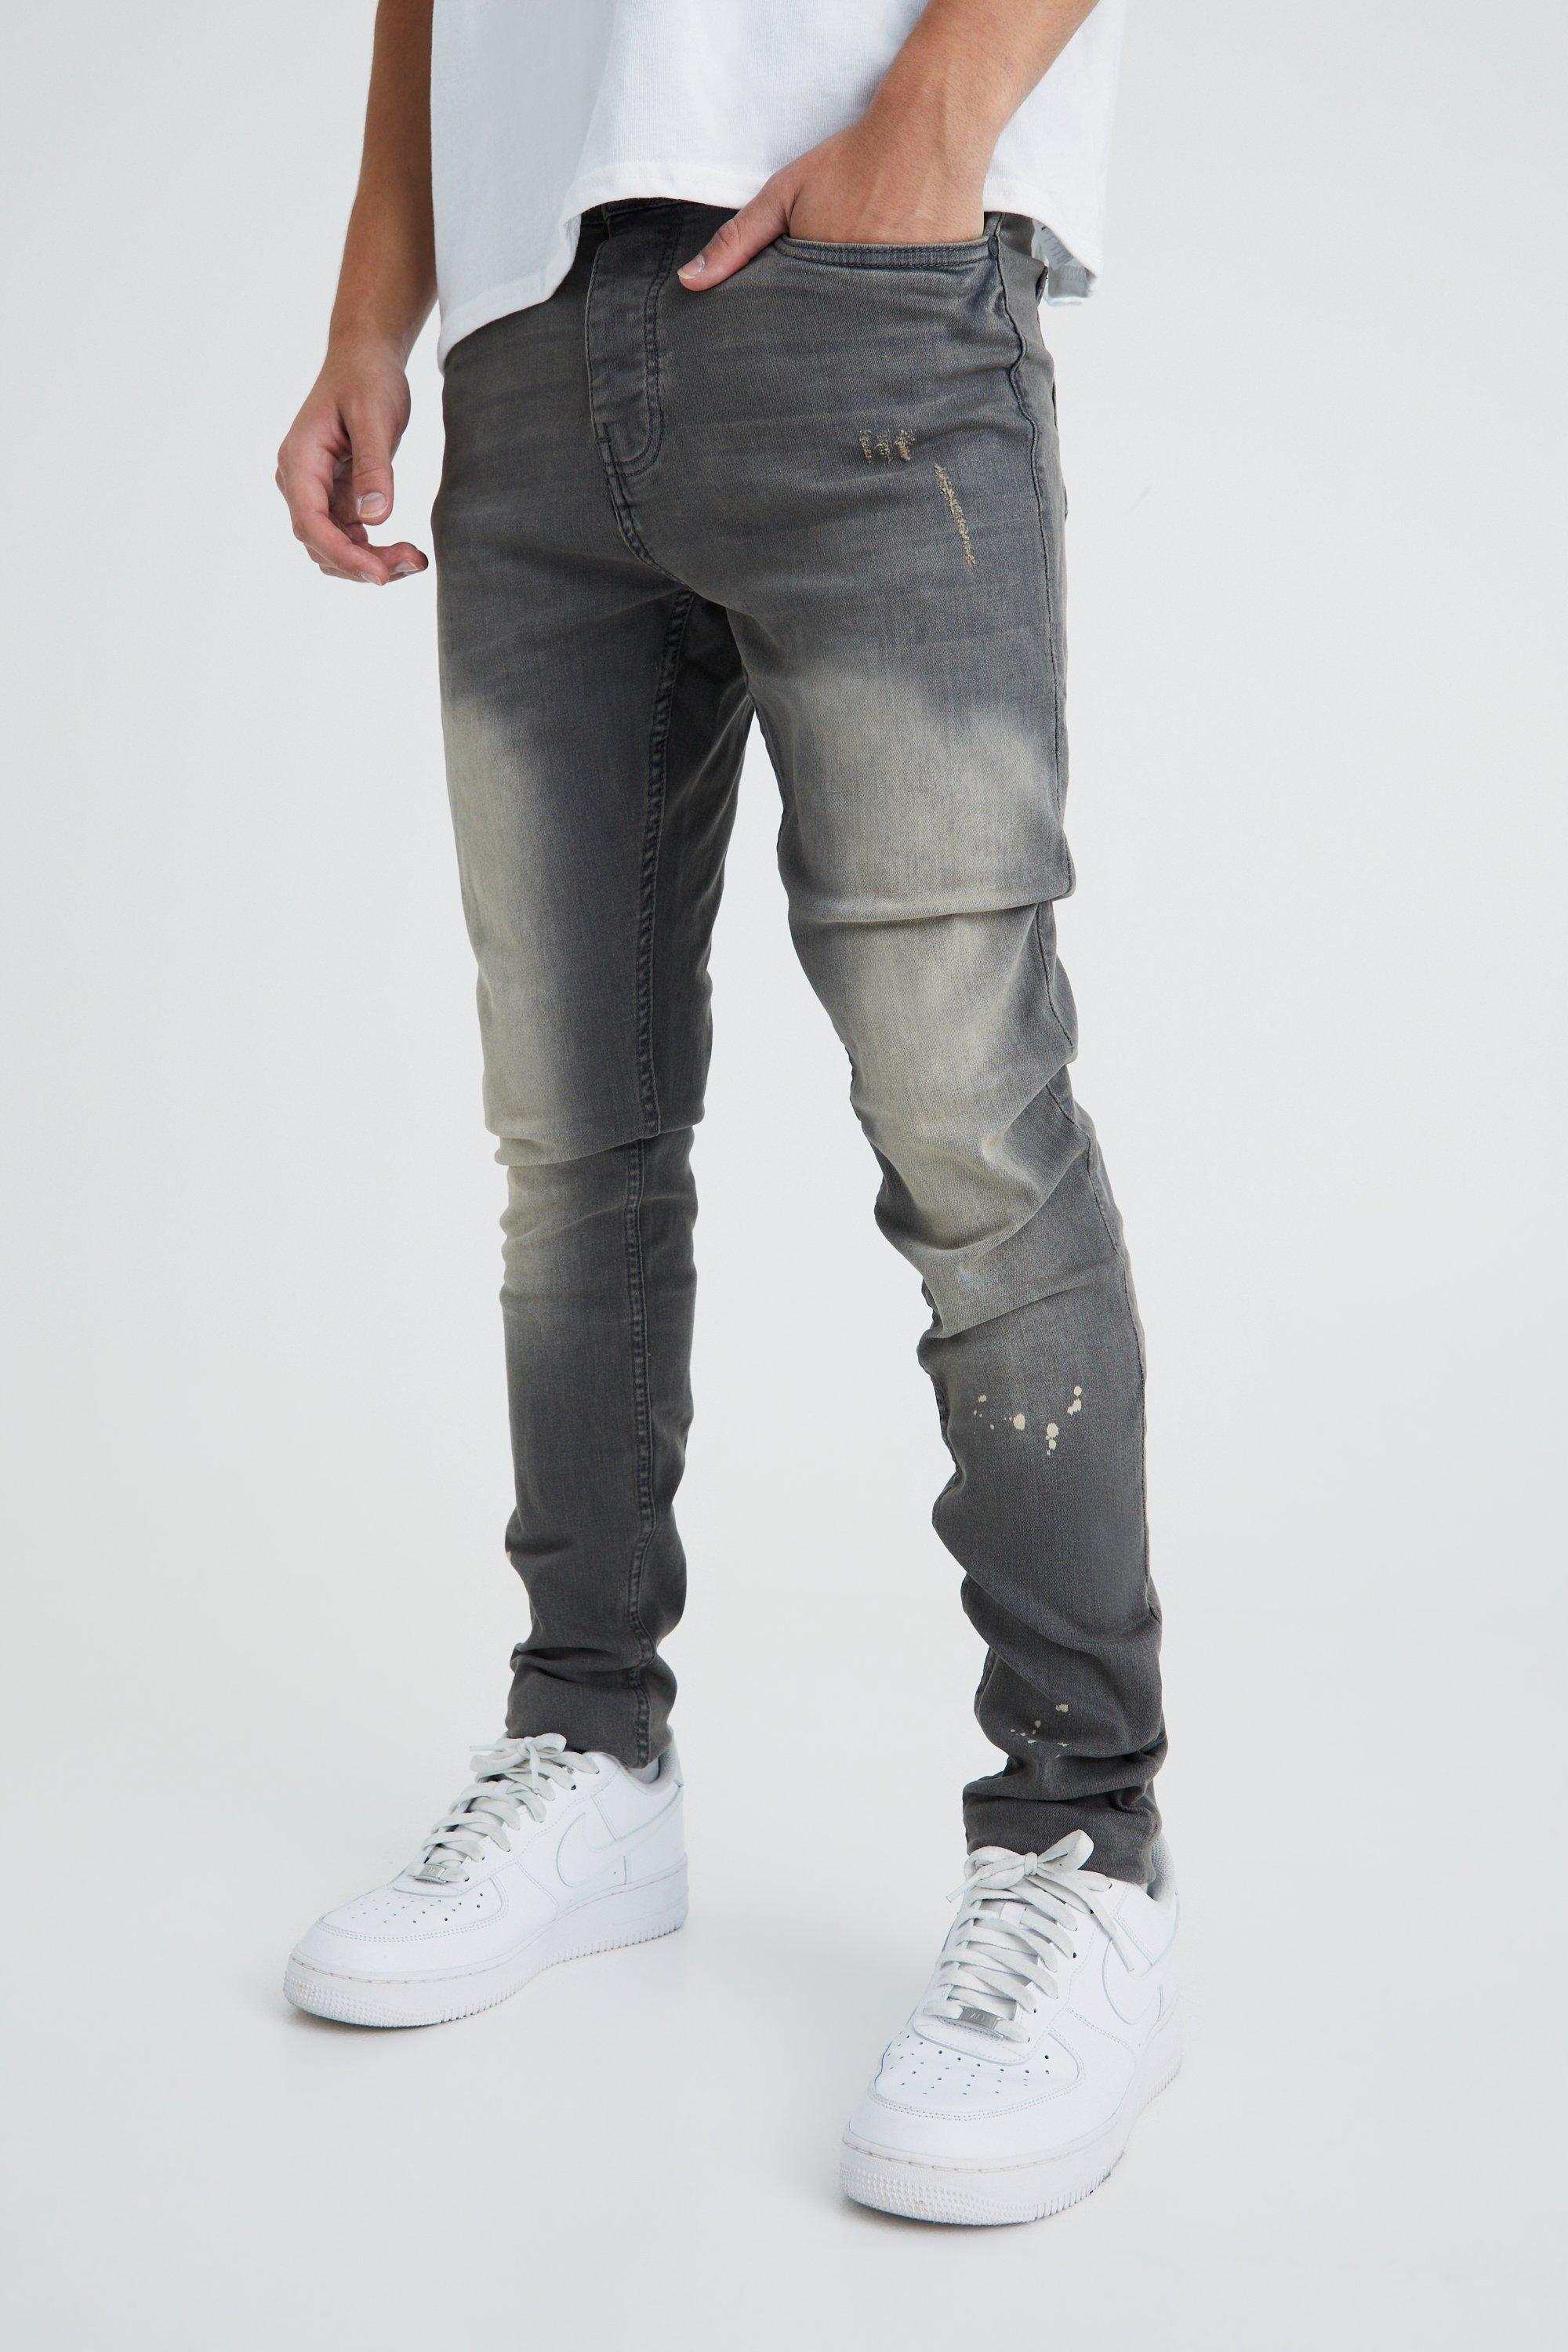 Mens Grey Skinny Stretch Stacked Tinted Jeans, Grey